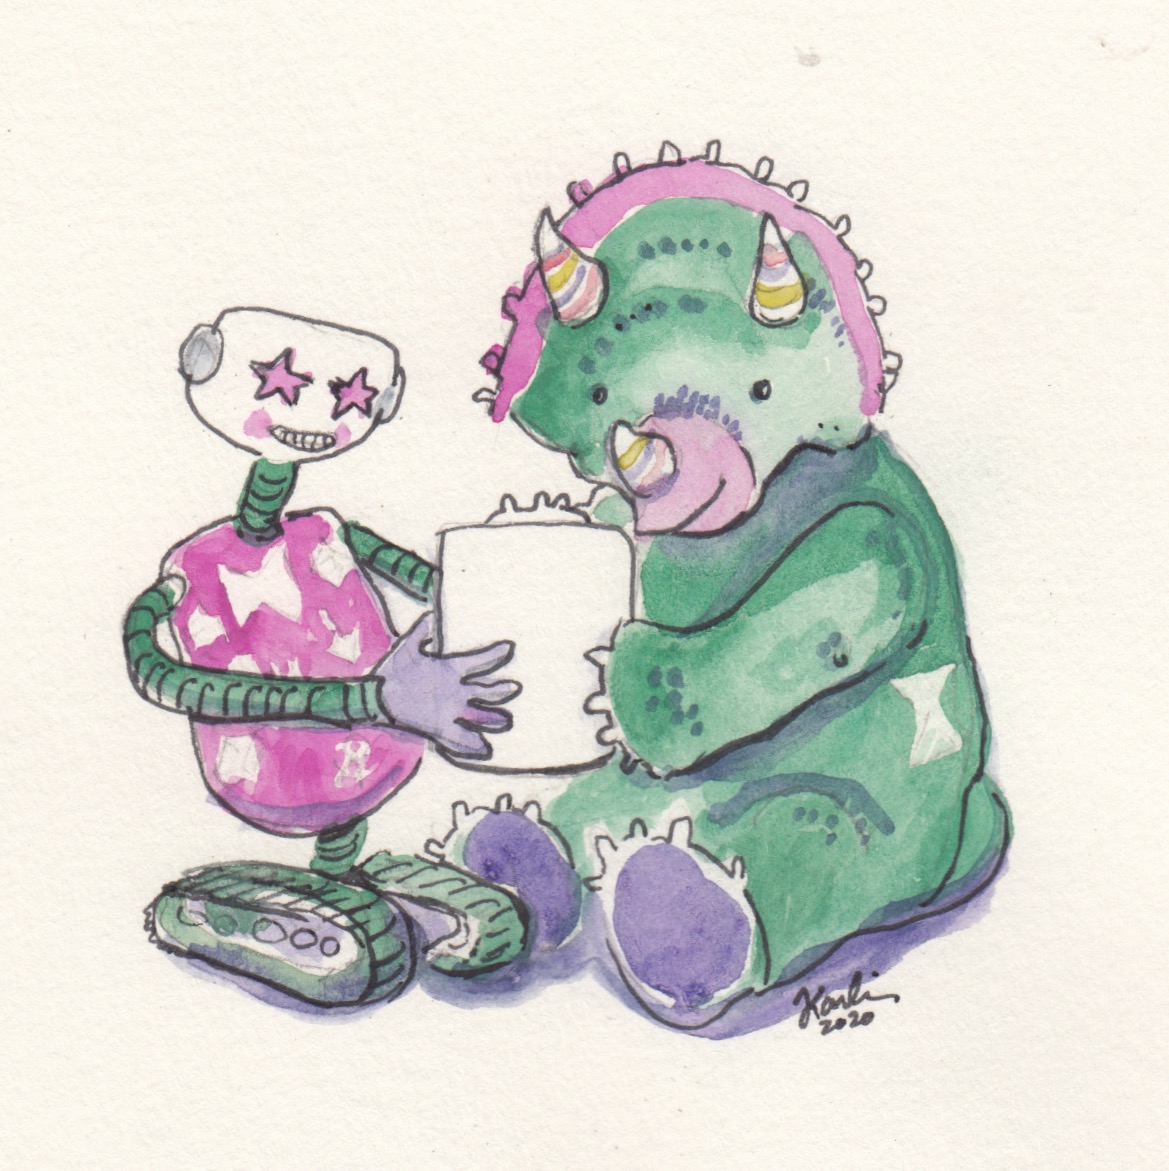 Illustration of a colorful robot looking over a tablet device with a dinosaur. Illustration credit Jojo Karlin 2020.